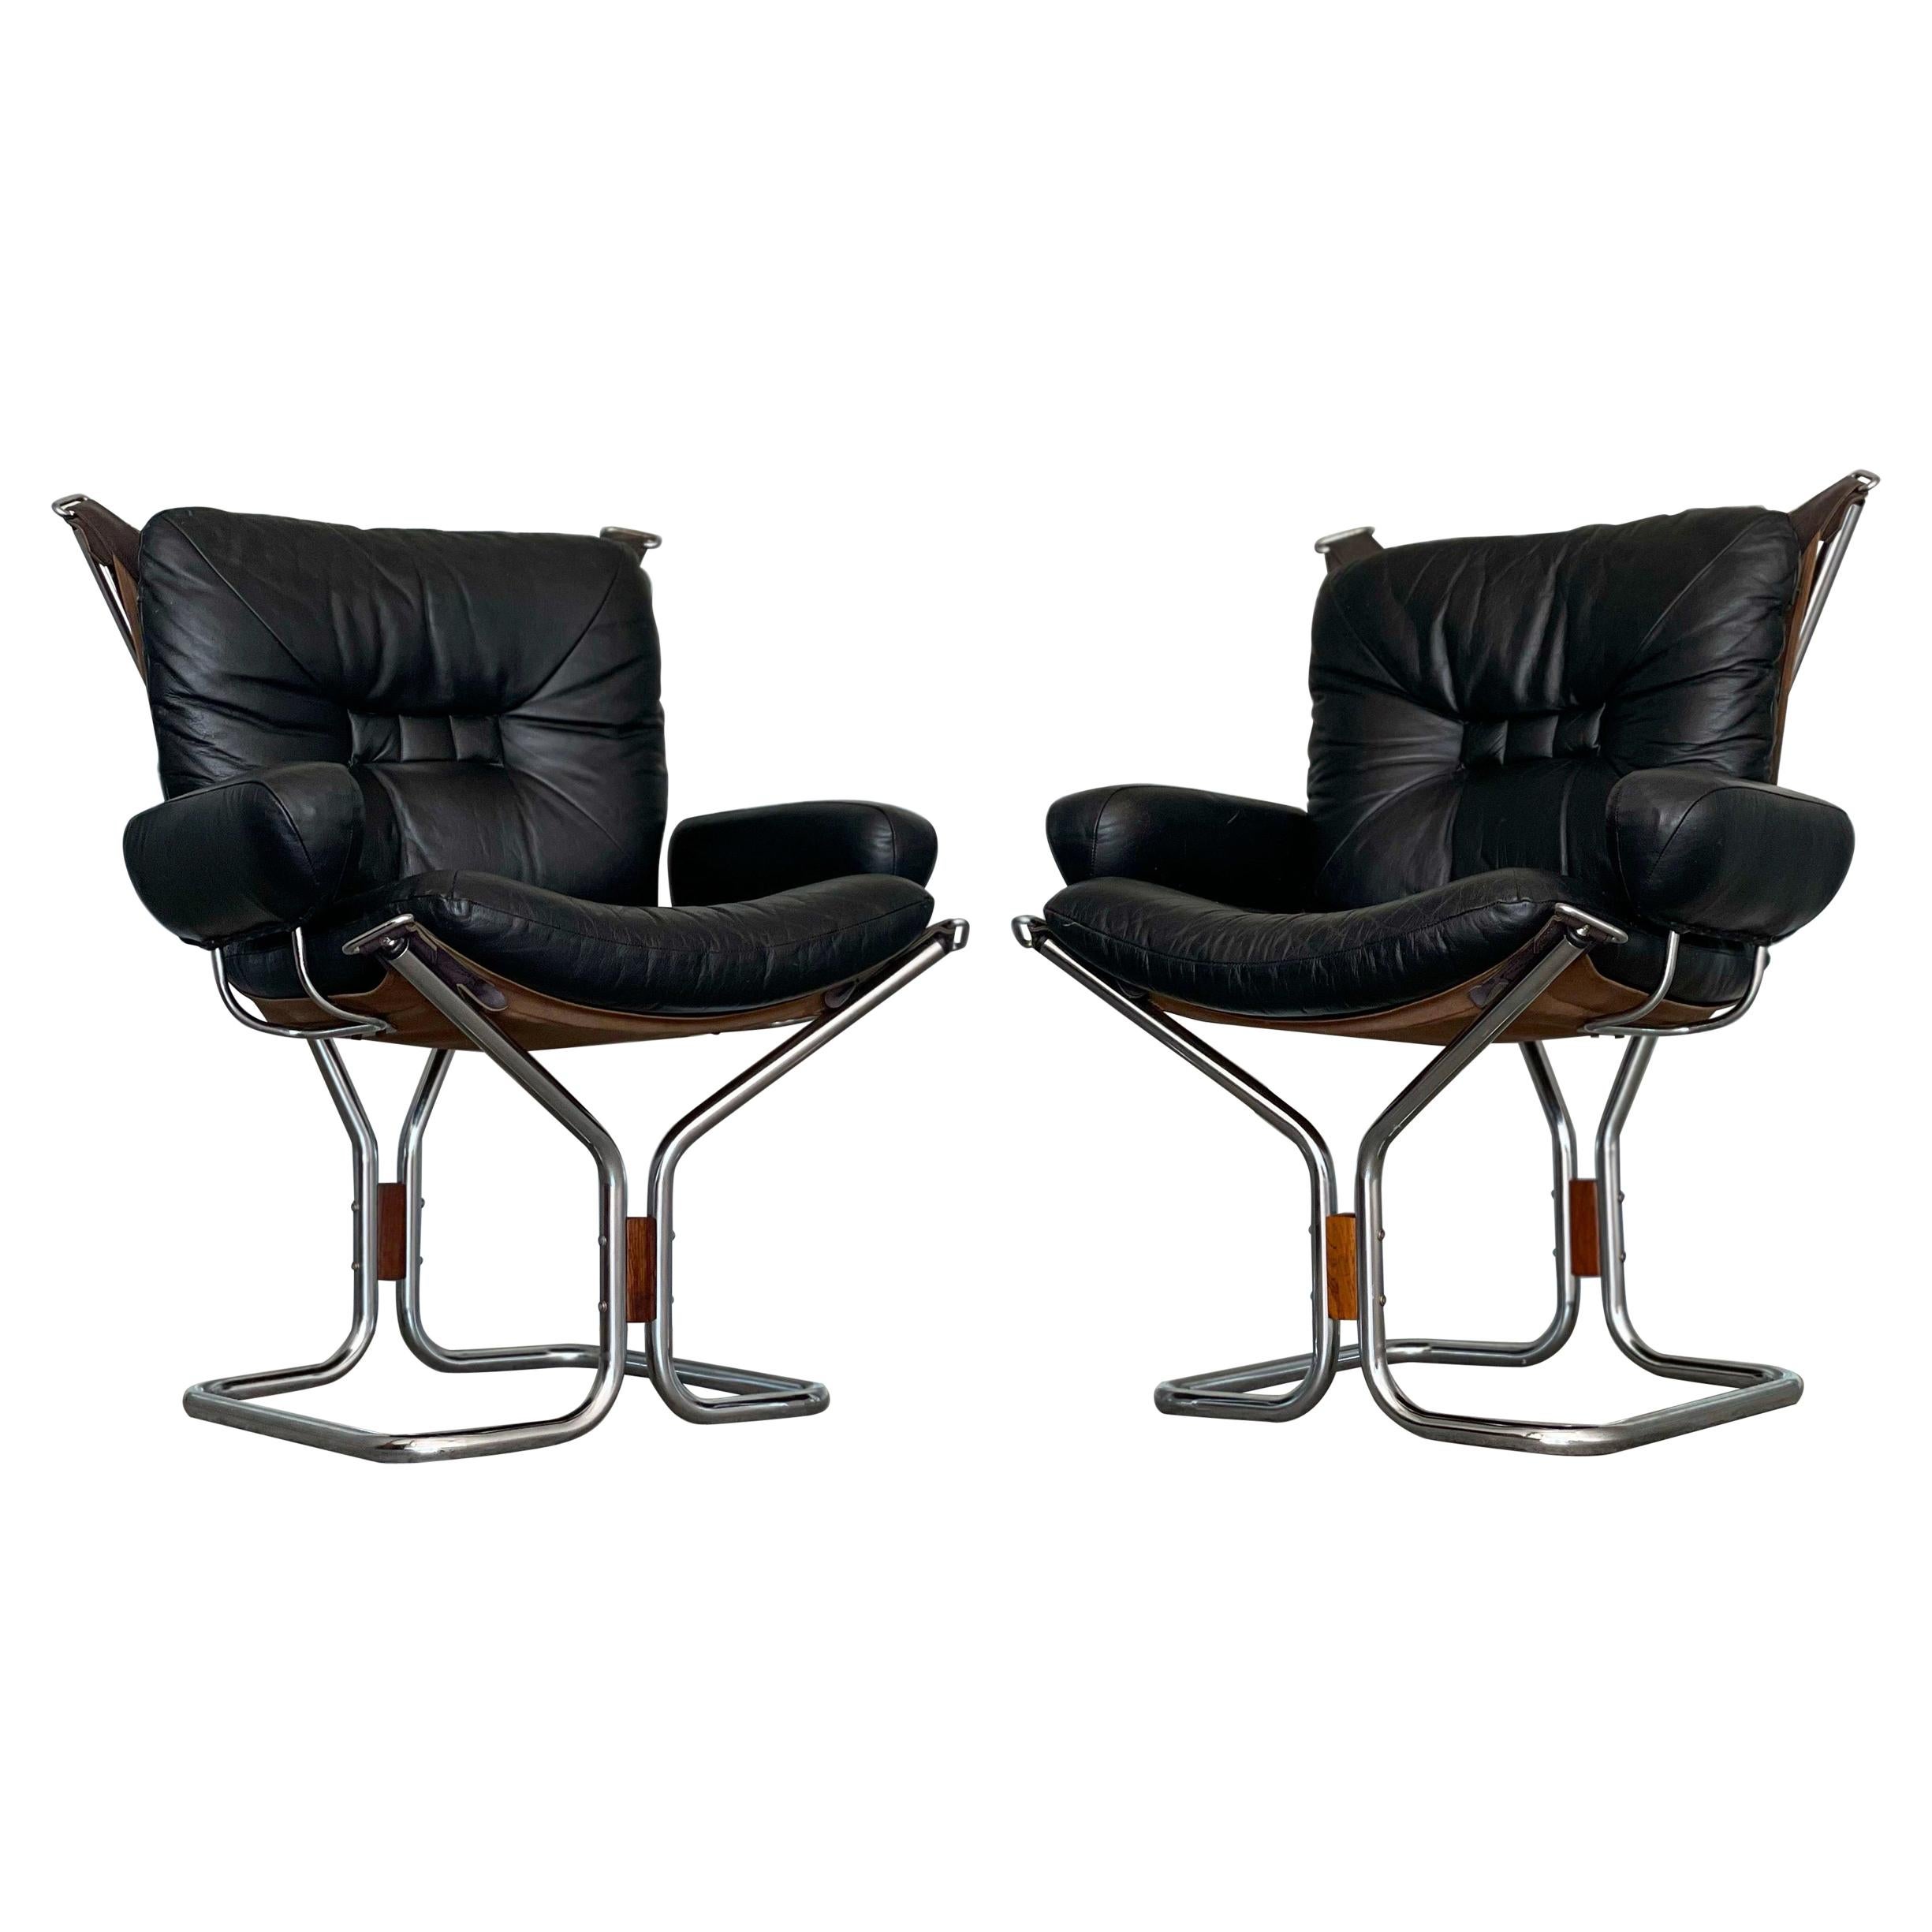 Pair of Midcentury Chairs Black Leather and Chrome, Ingmar Relling for Westnofa